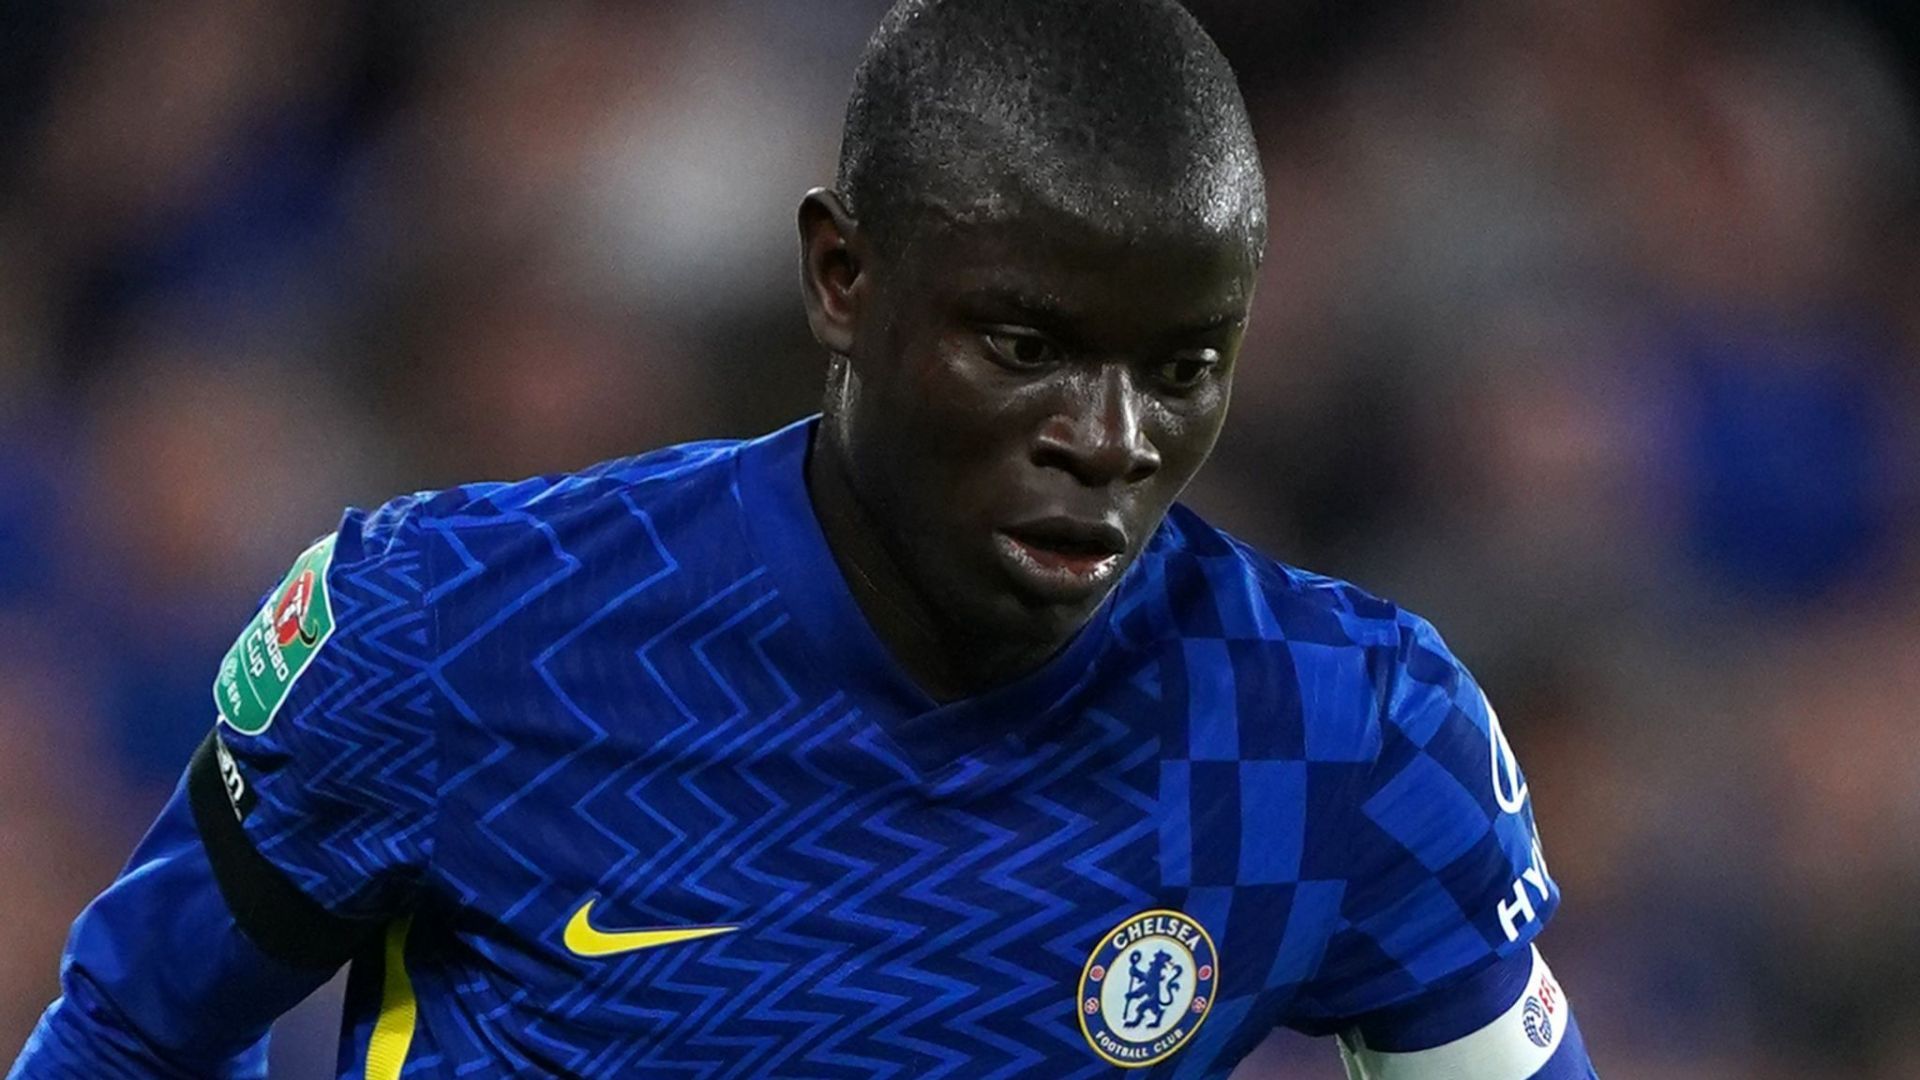 Kante had an impressive outing today